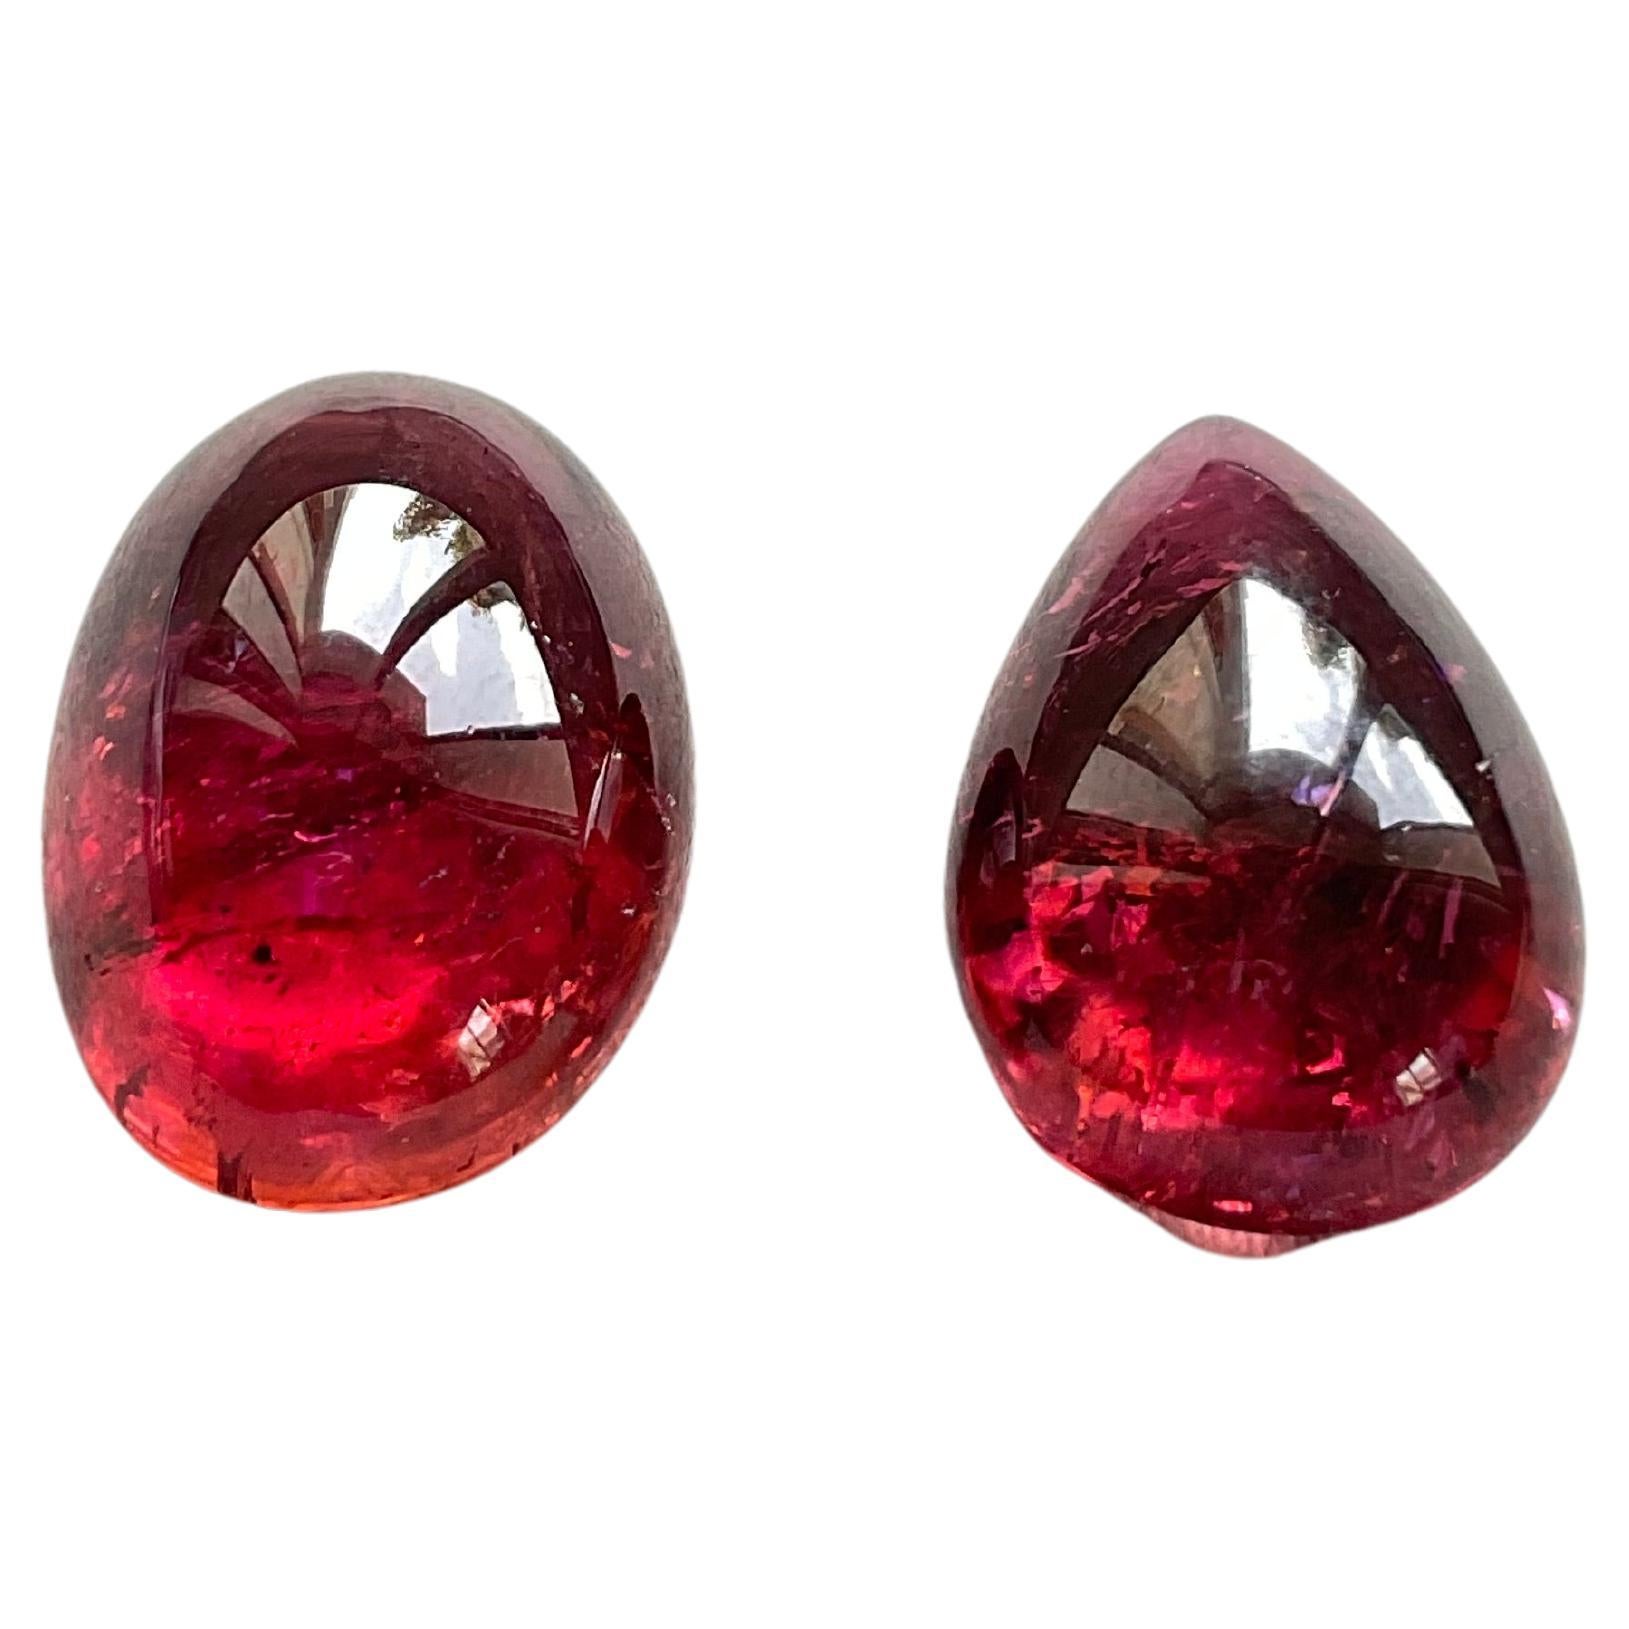 56.67 Carats Top Quality Rubellite Tourmaline Pear & Oval 2 Pieces Natural Gem